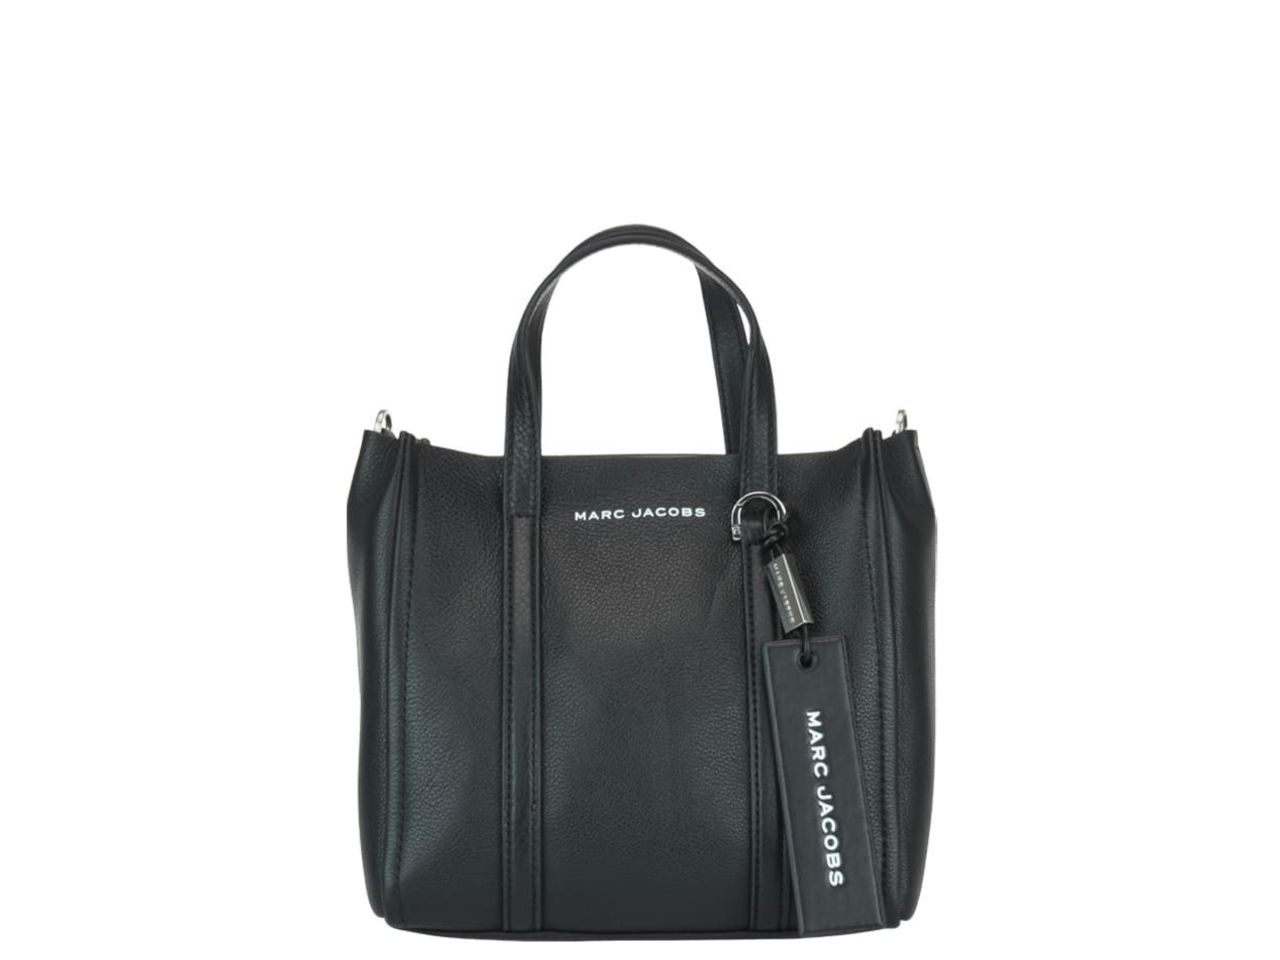 Marc Jacobs The Tag Tote 21 Bag